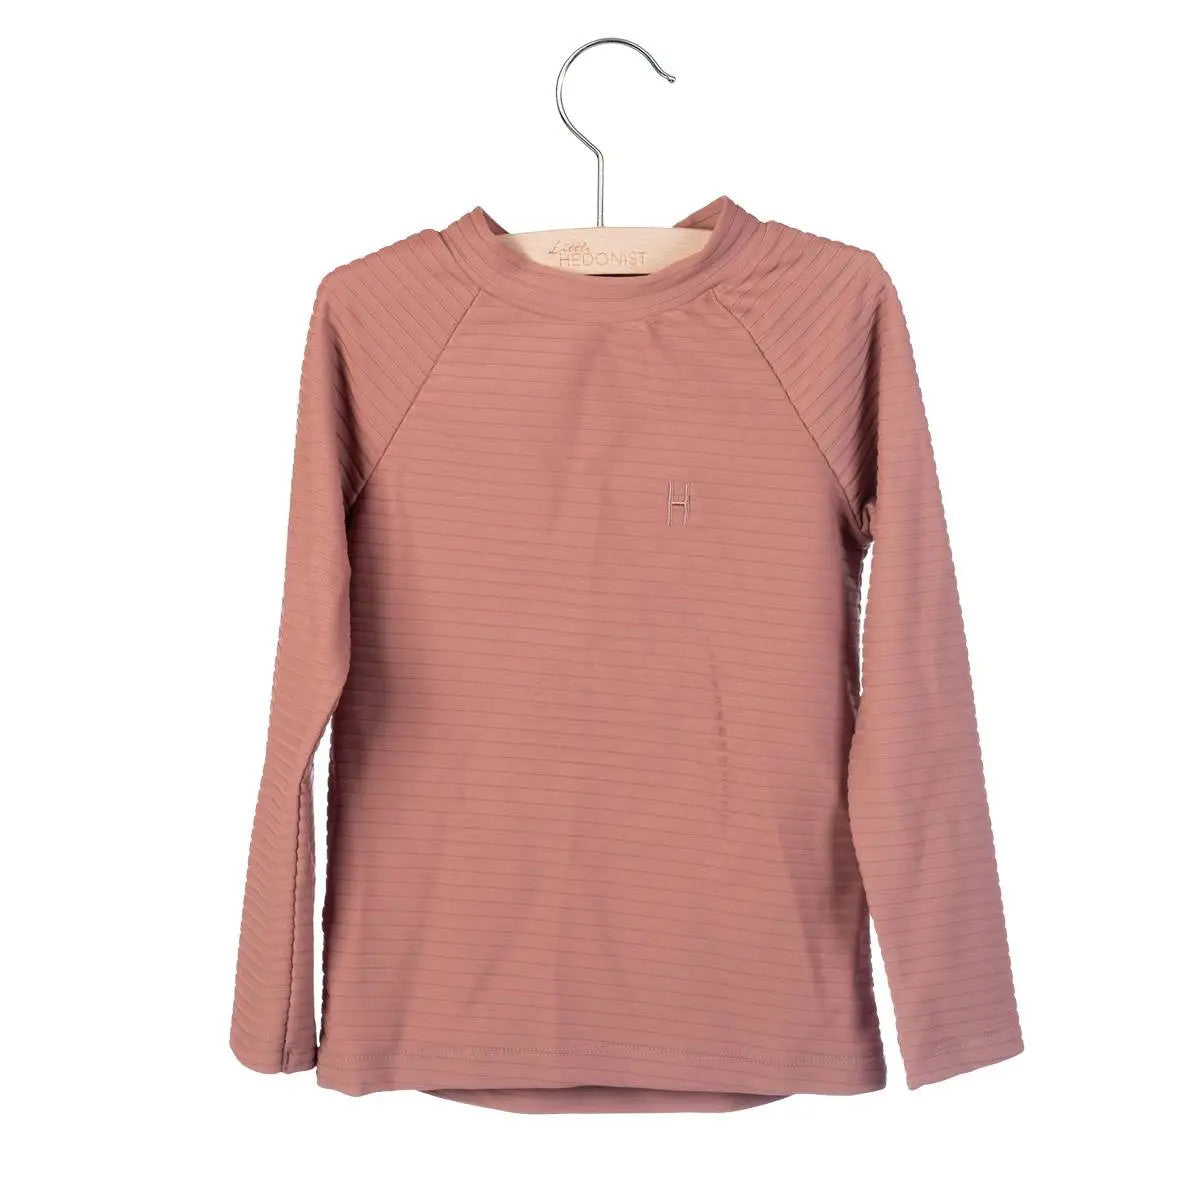 Little Hedonist long-sleeve UV shirt made of recycled polyamide in Burlwood Pink